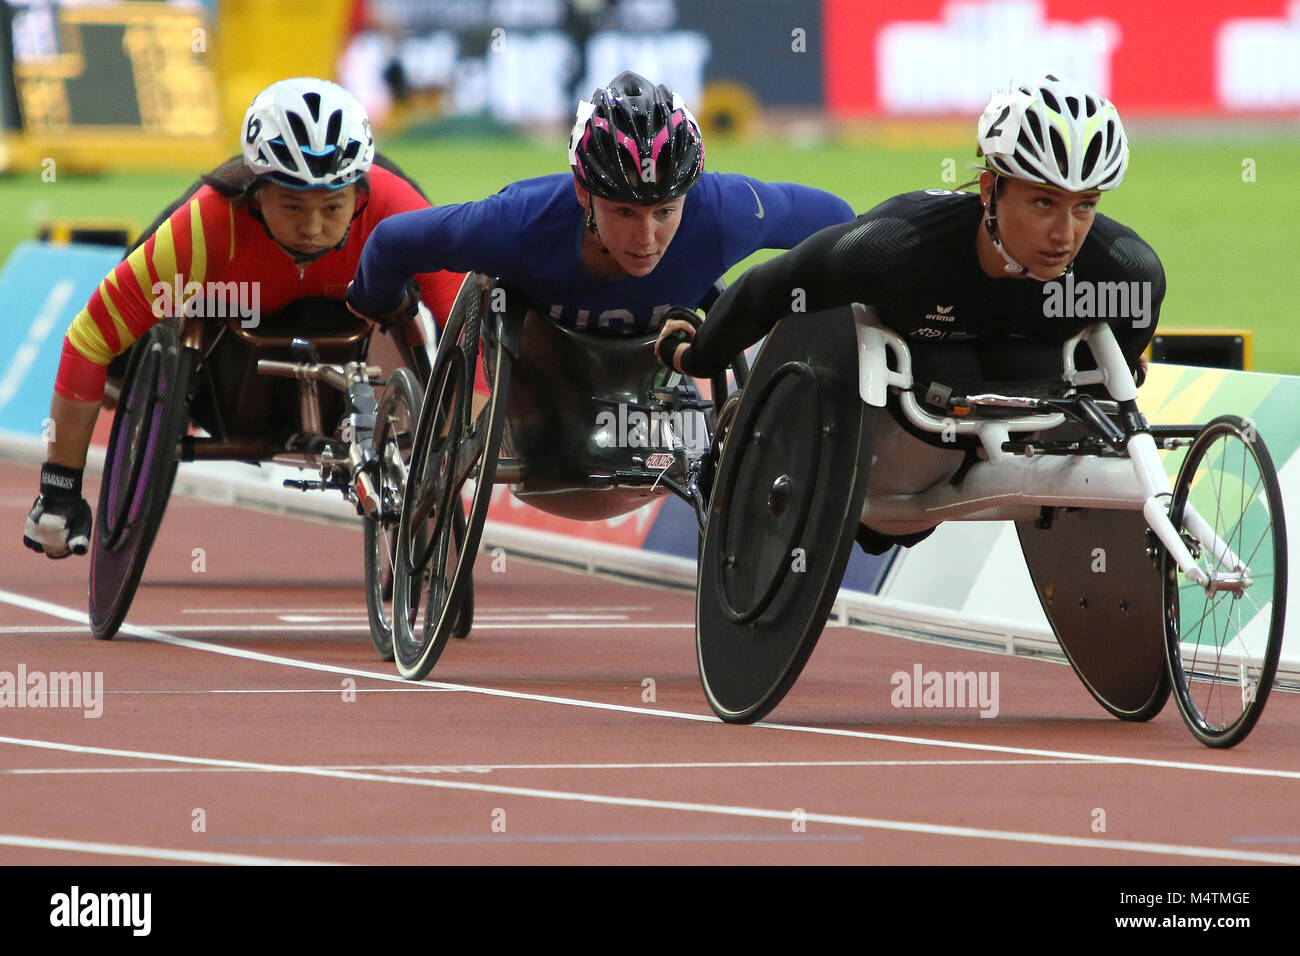 Amanda MCGRORY (centre) of the USA in the Women's 800m T54 heats at the World Para Championships in London 2017 Stock Photo